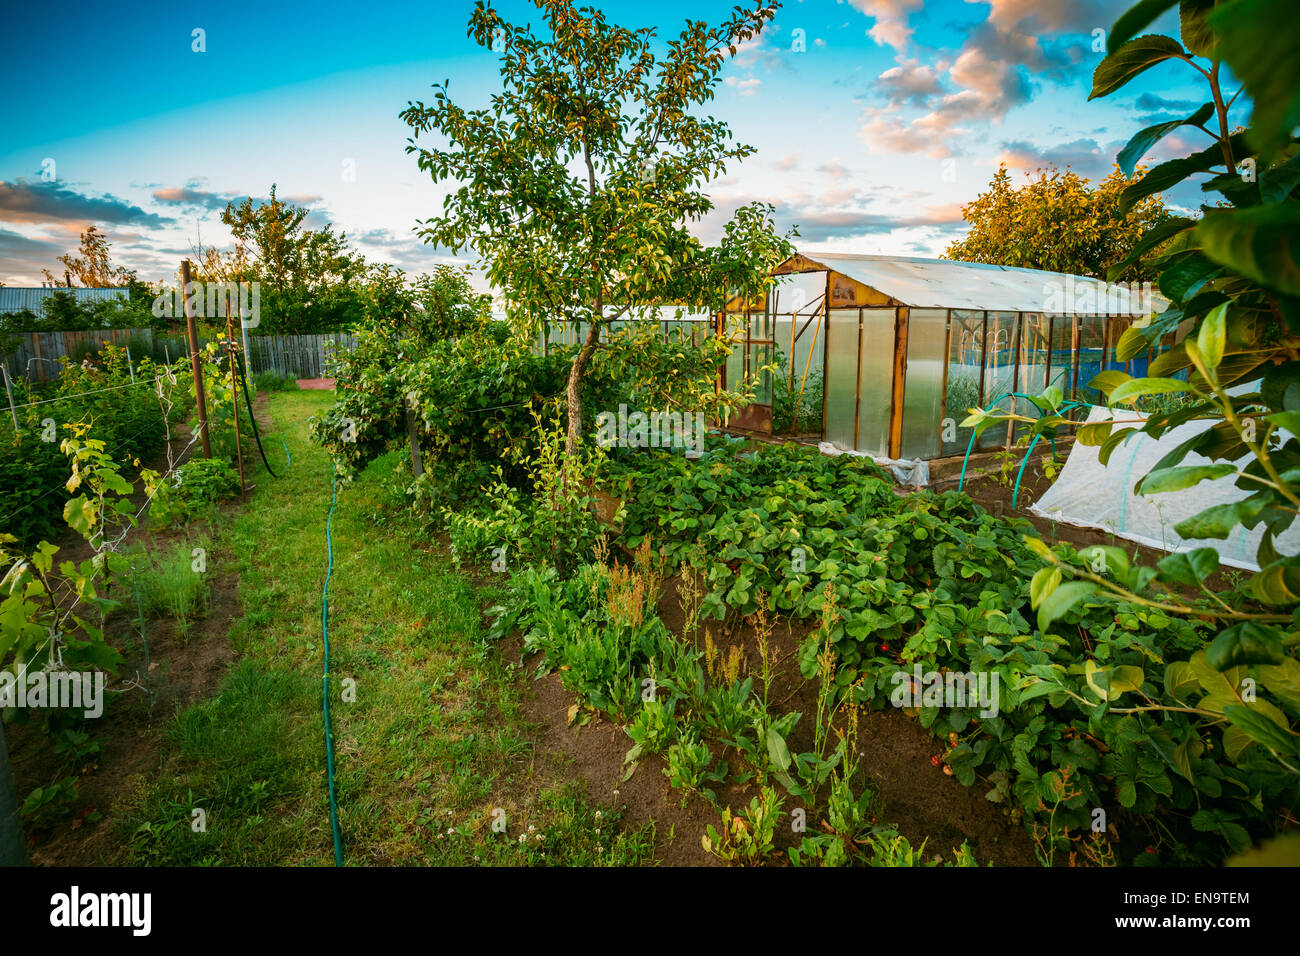 Vegetables Growing In Raised Beds In Vegetable Garden And Hothouse Stock Photo